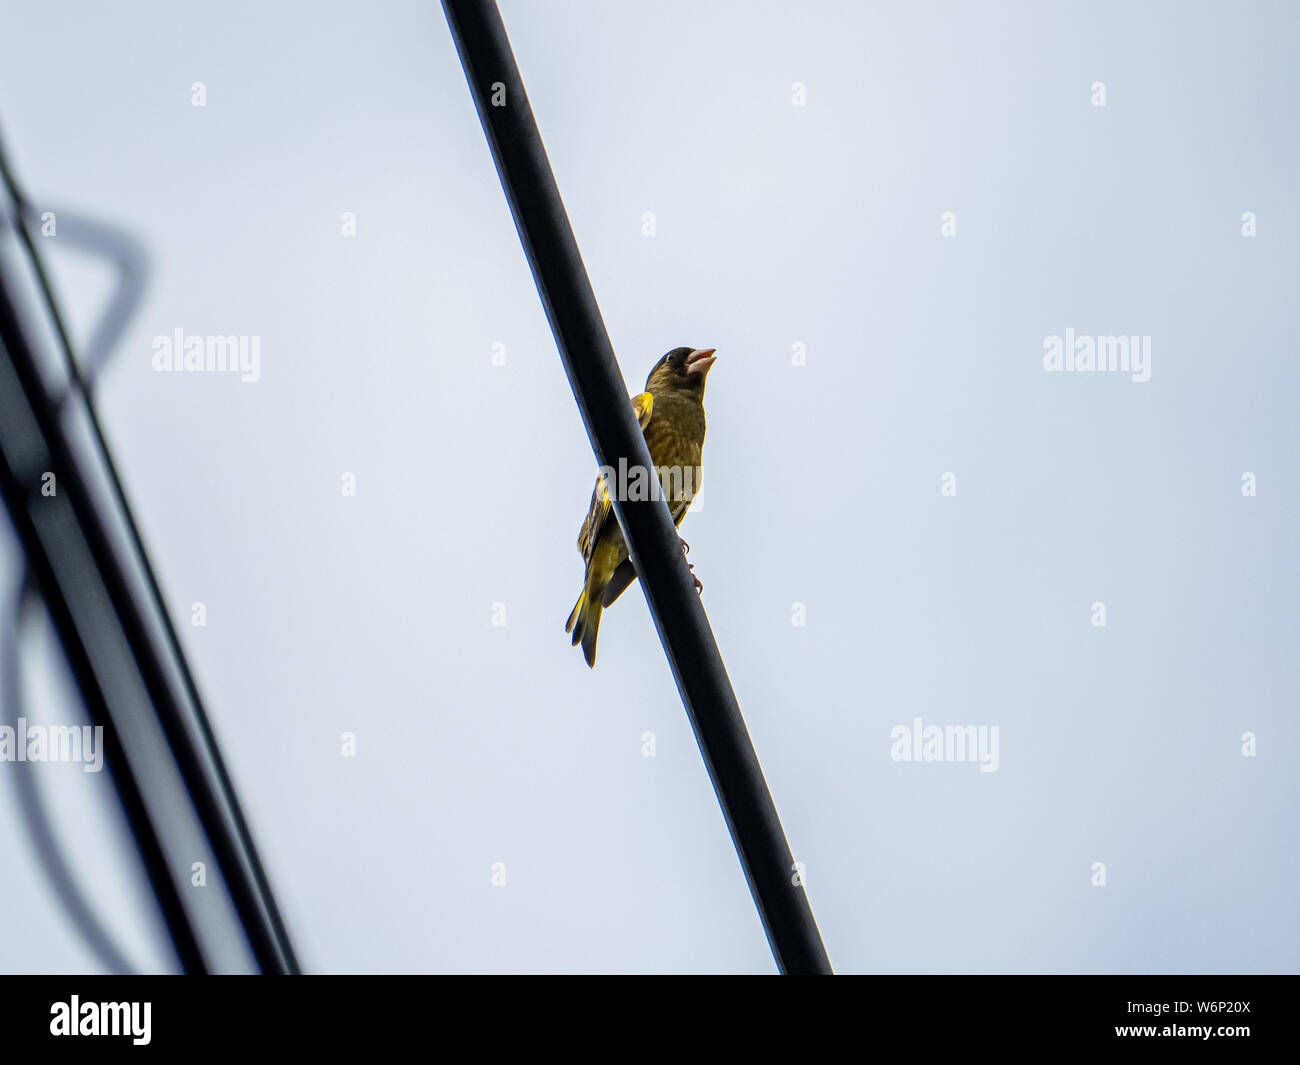 An oriental greenfinch, also called a Grey-capped greenfinch or Chloris sinica, perches on a power line in a Japanese apartment complex. Stock Photo